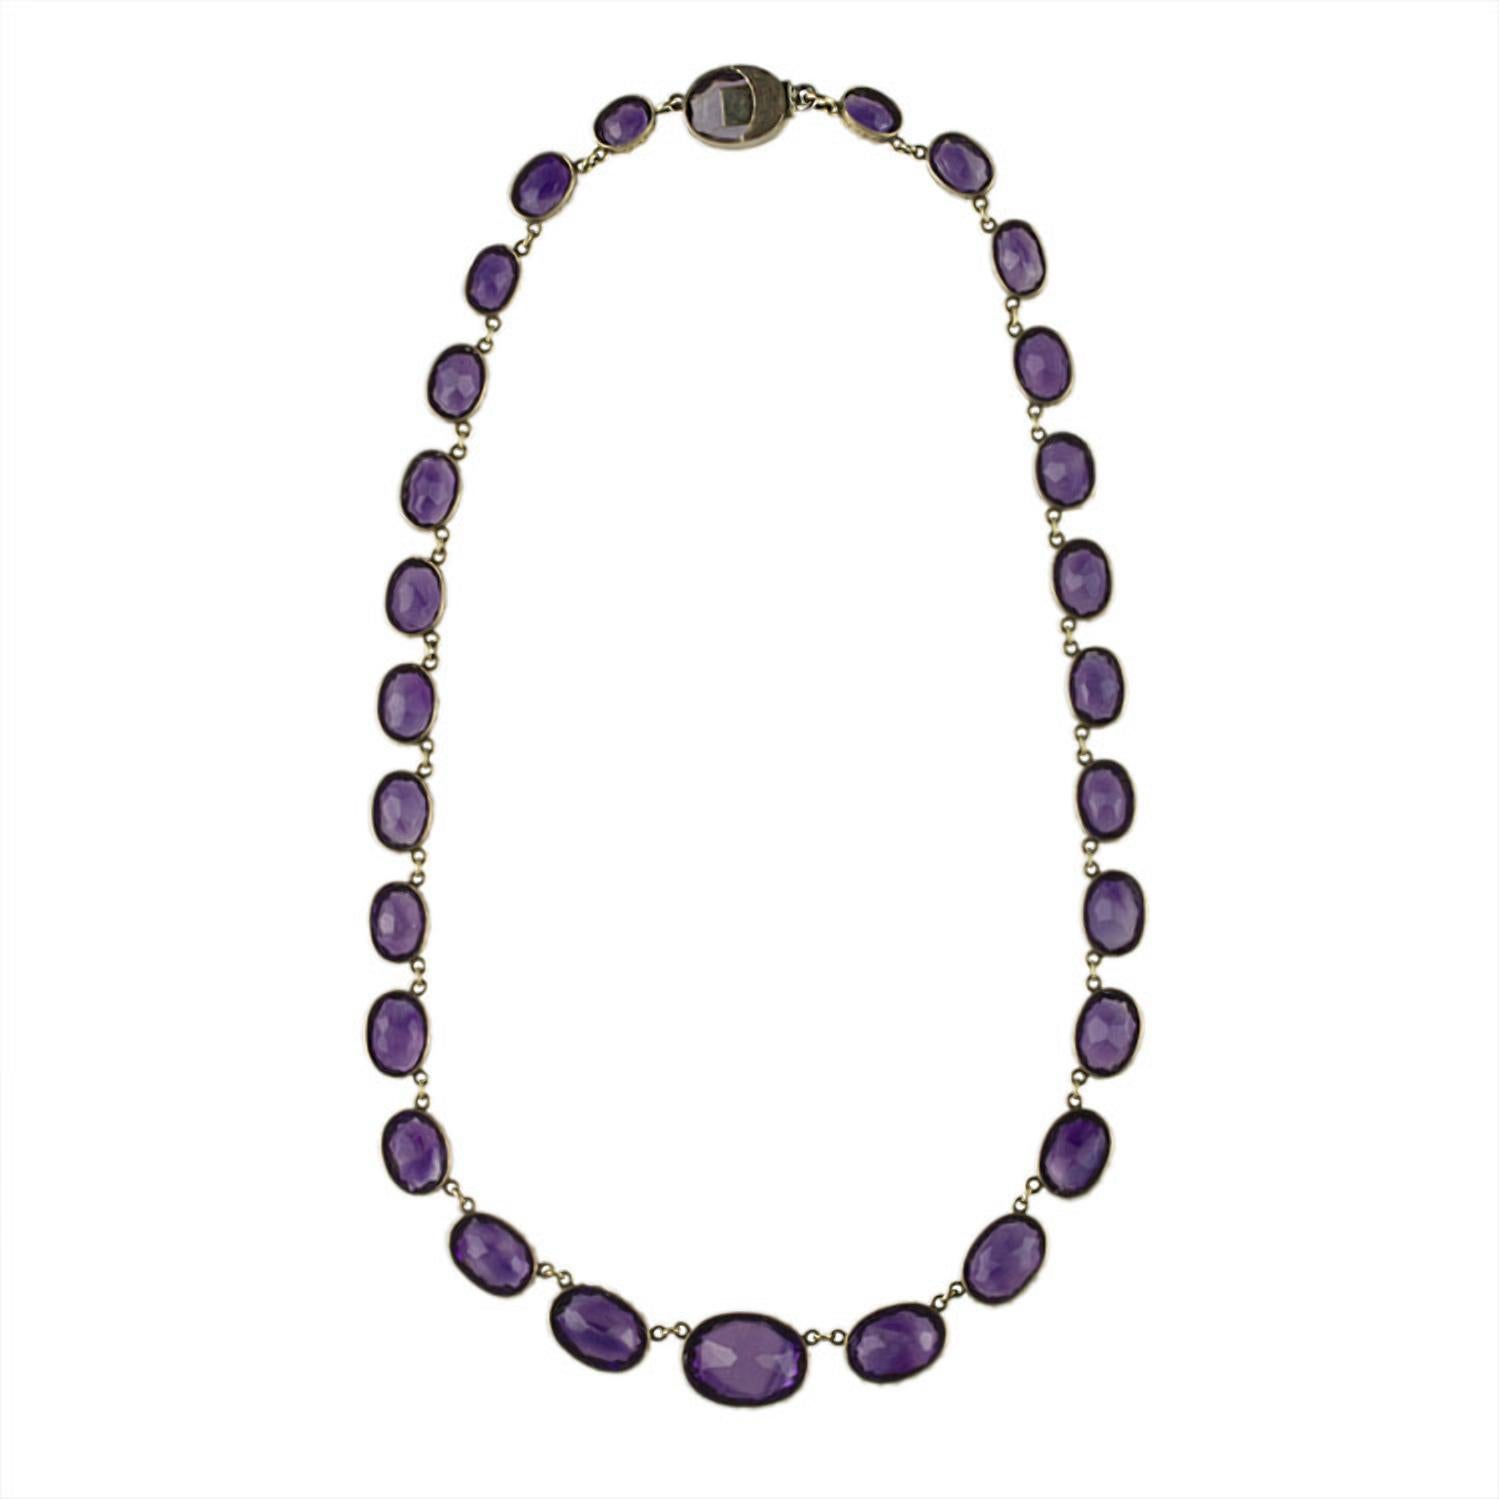 A Victorian amethyst riviere necklace, the twenty eight graduated oval mixed-cut amethysts each set within a yellow gold collet, measuring approximately 9.1 x 6.5 x 3.8mm, to 17.4 x 12.6 x 8.3mm, to a hidden snap clasp, circa 1860,measuring